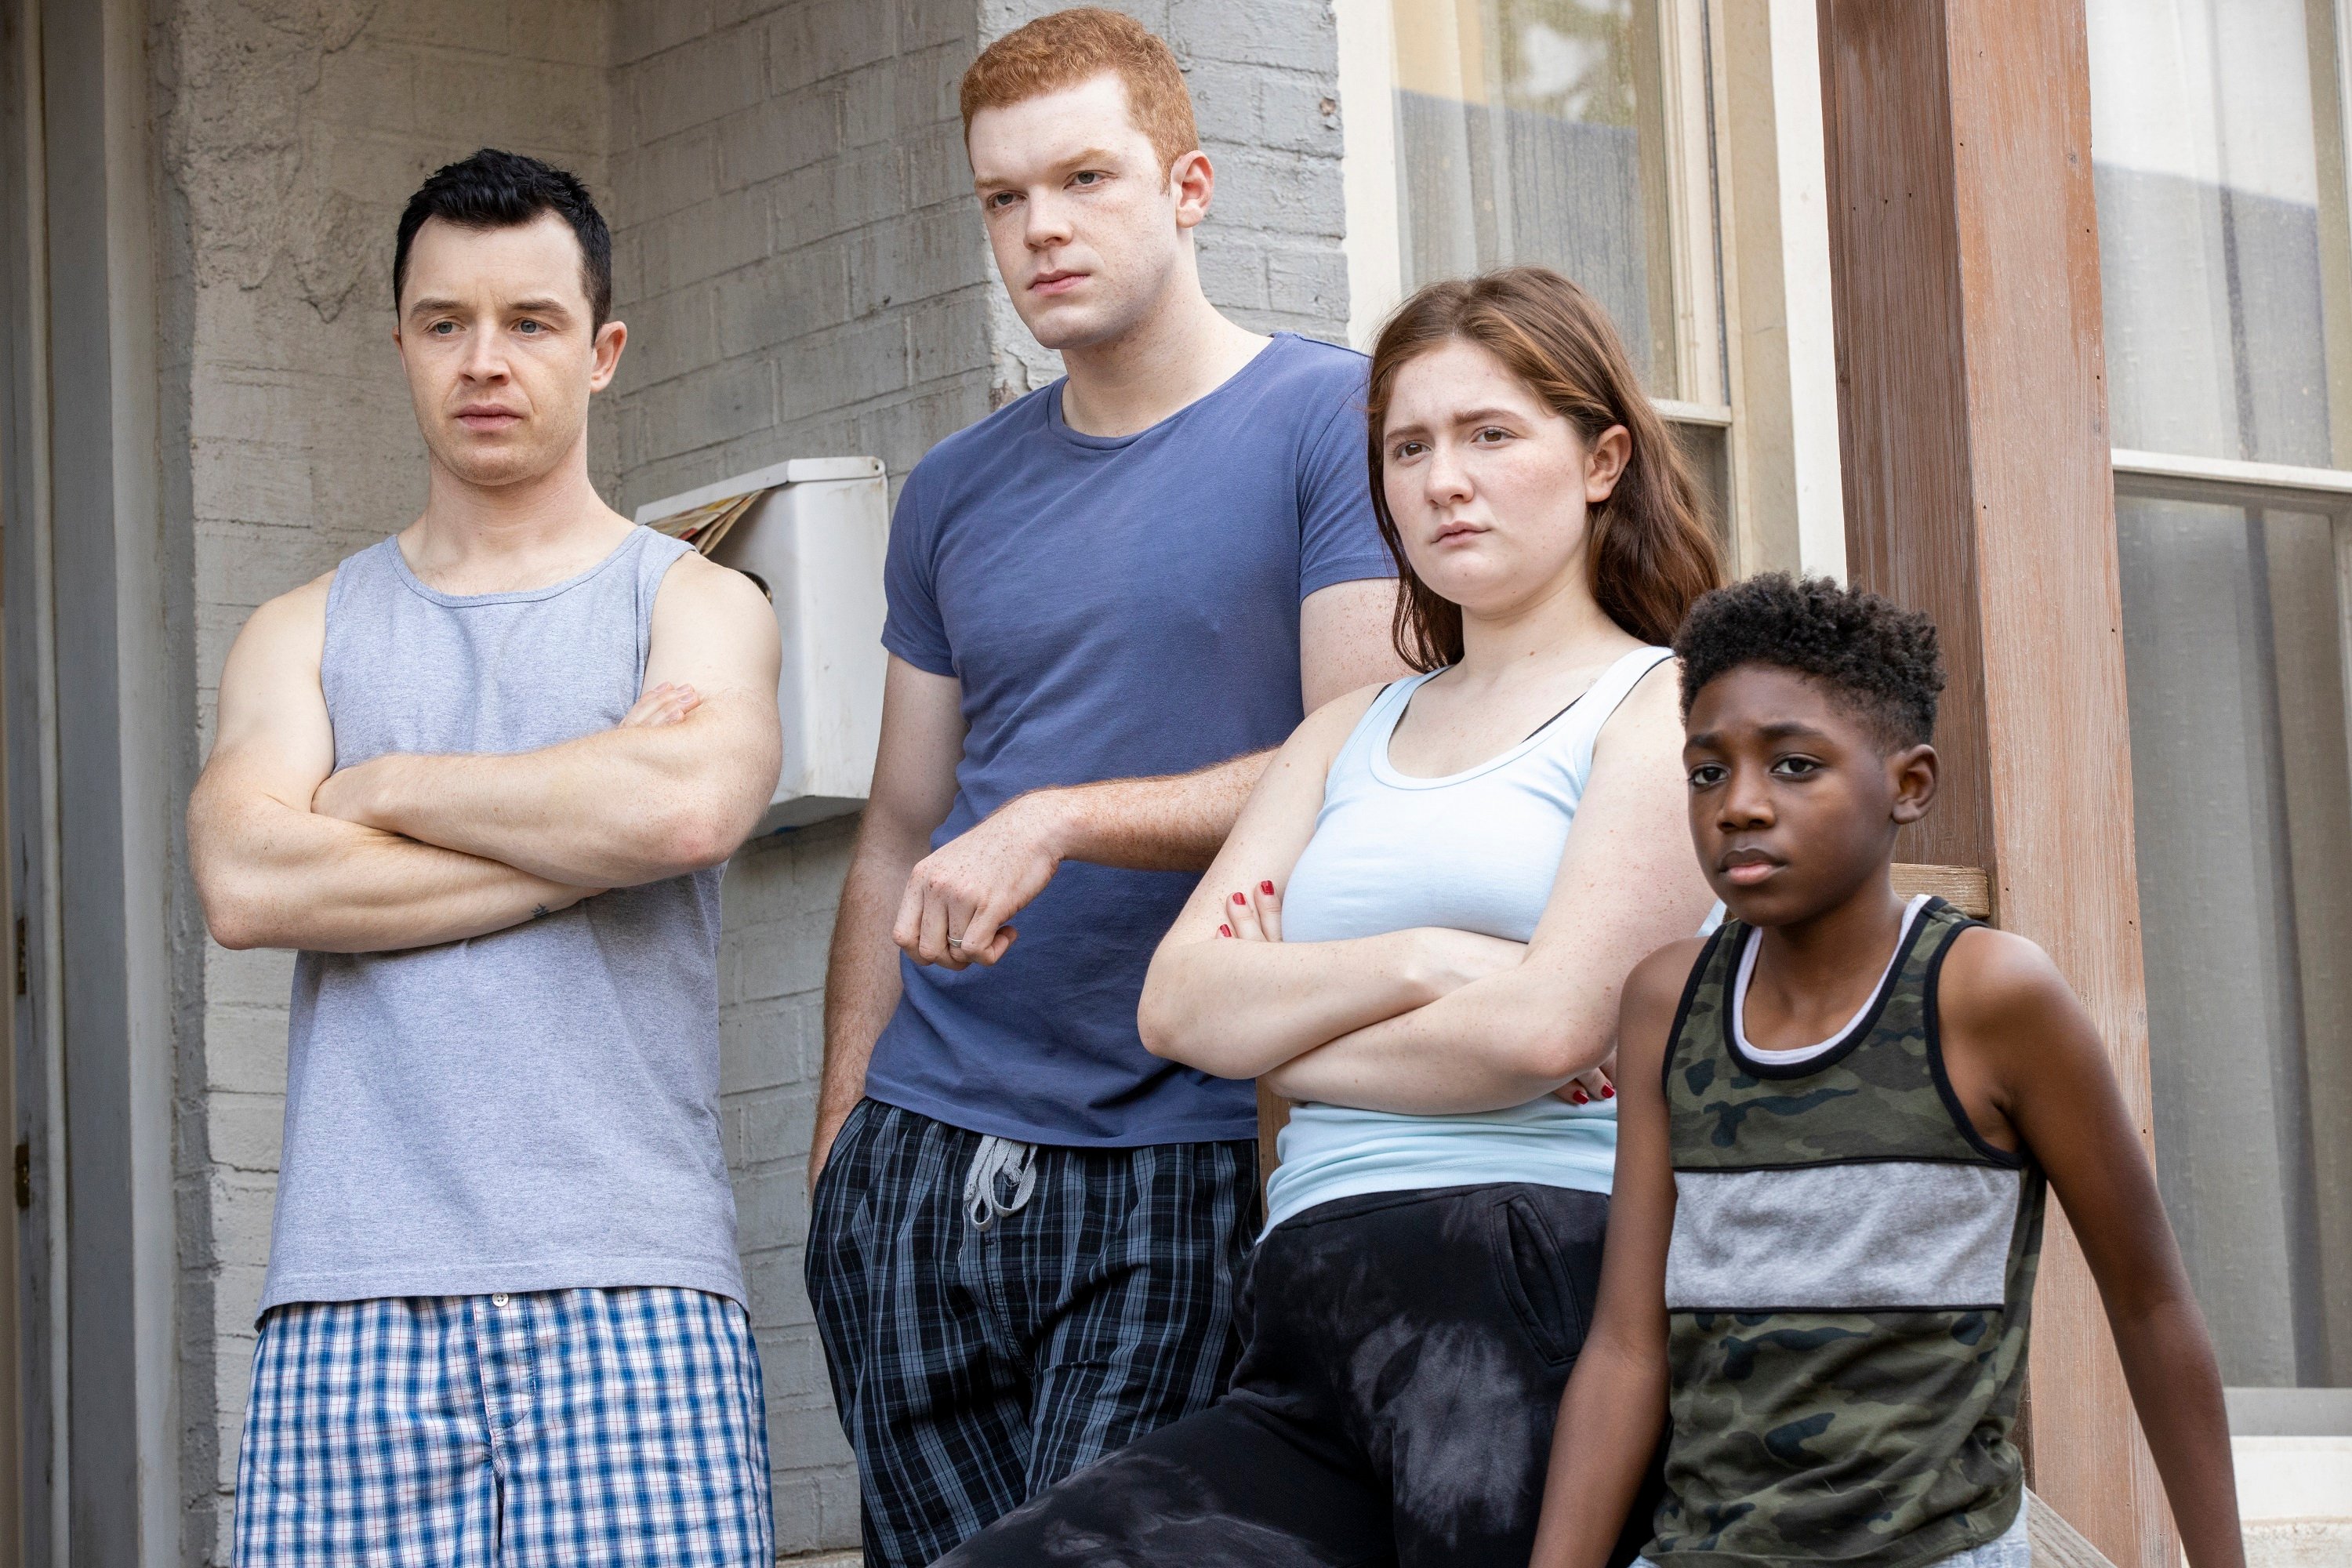 'Shameless' stars Noel Fisher as Mickey Milkovich, Cameron Monaghan as Ian Gallagher, Emma Kenney as Debbie Gallagher and Christian Isaiah as Liam Gallagher